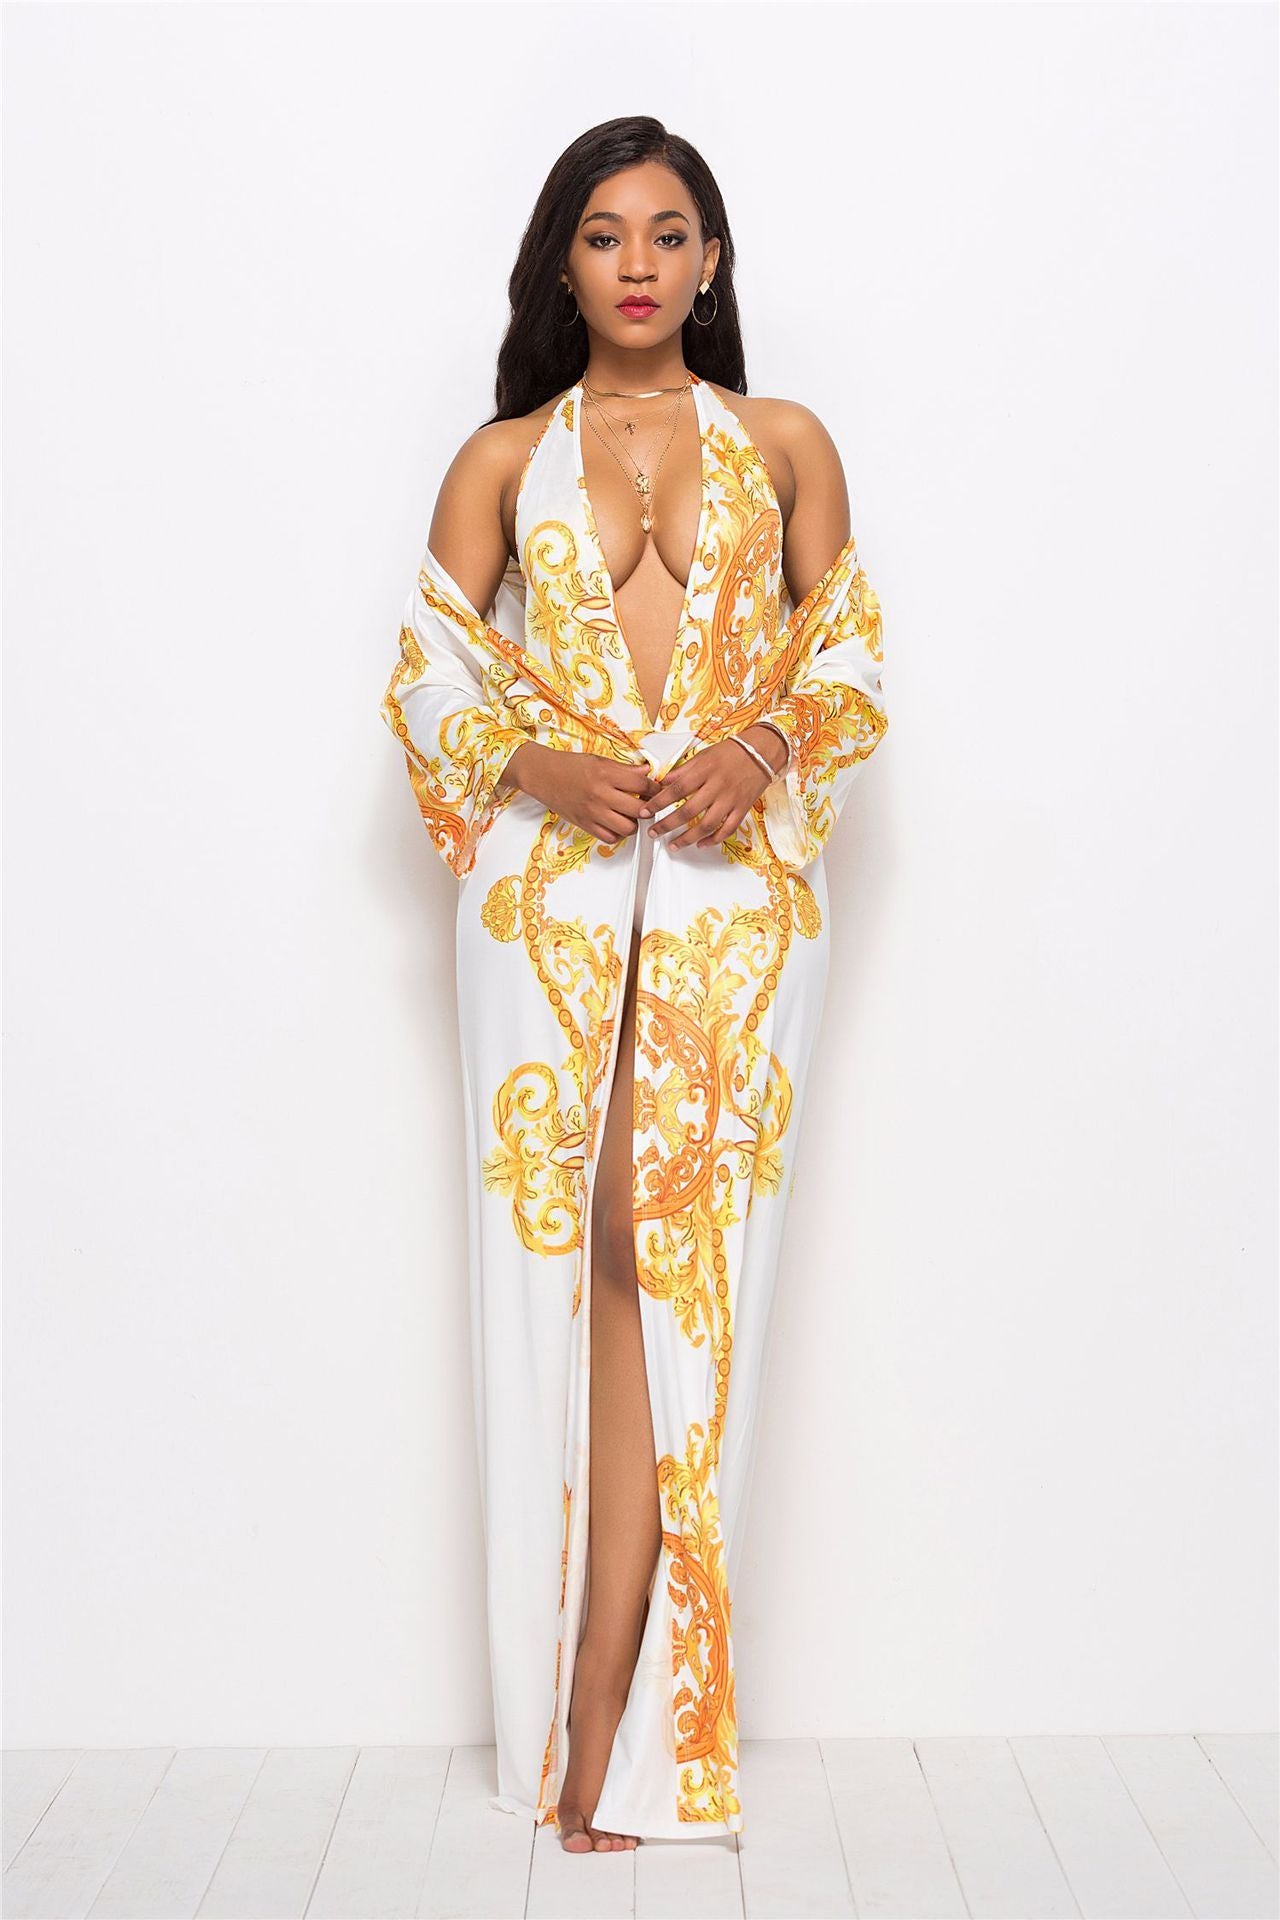 Sexy Women Print One Piece Swimsuit+ Summer Beach Cover Ups--Free Shipping at meselling99